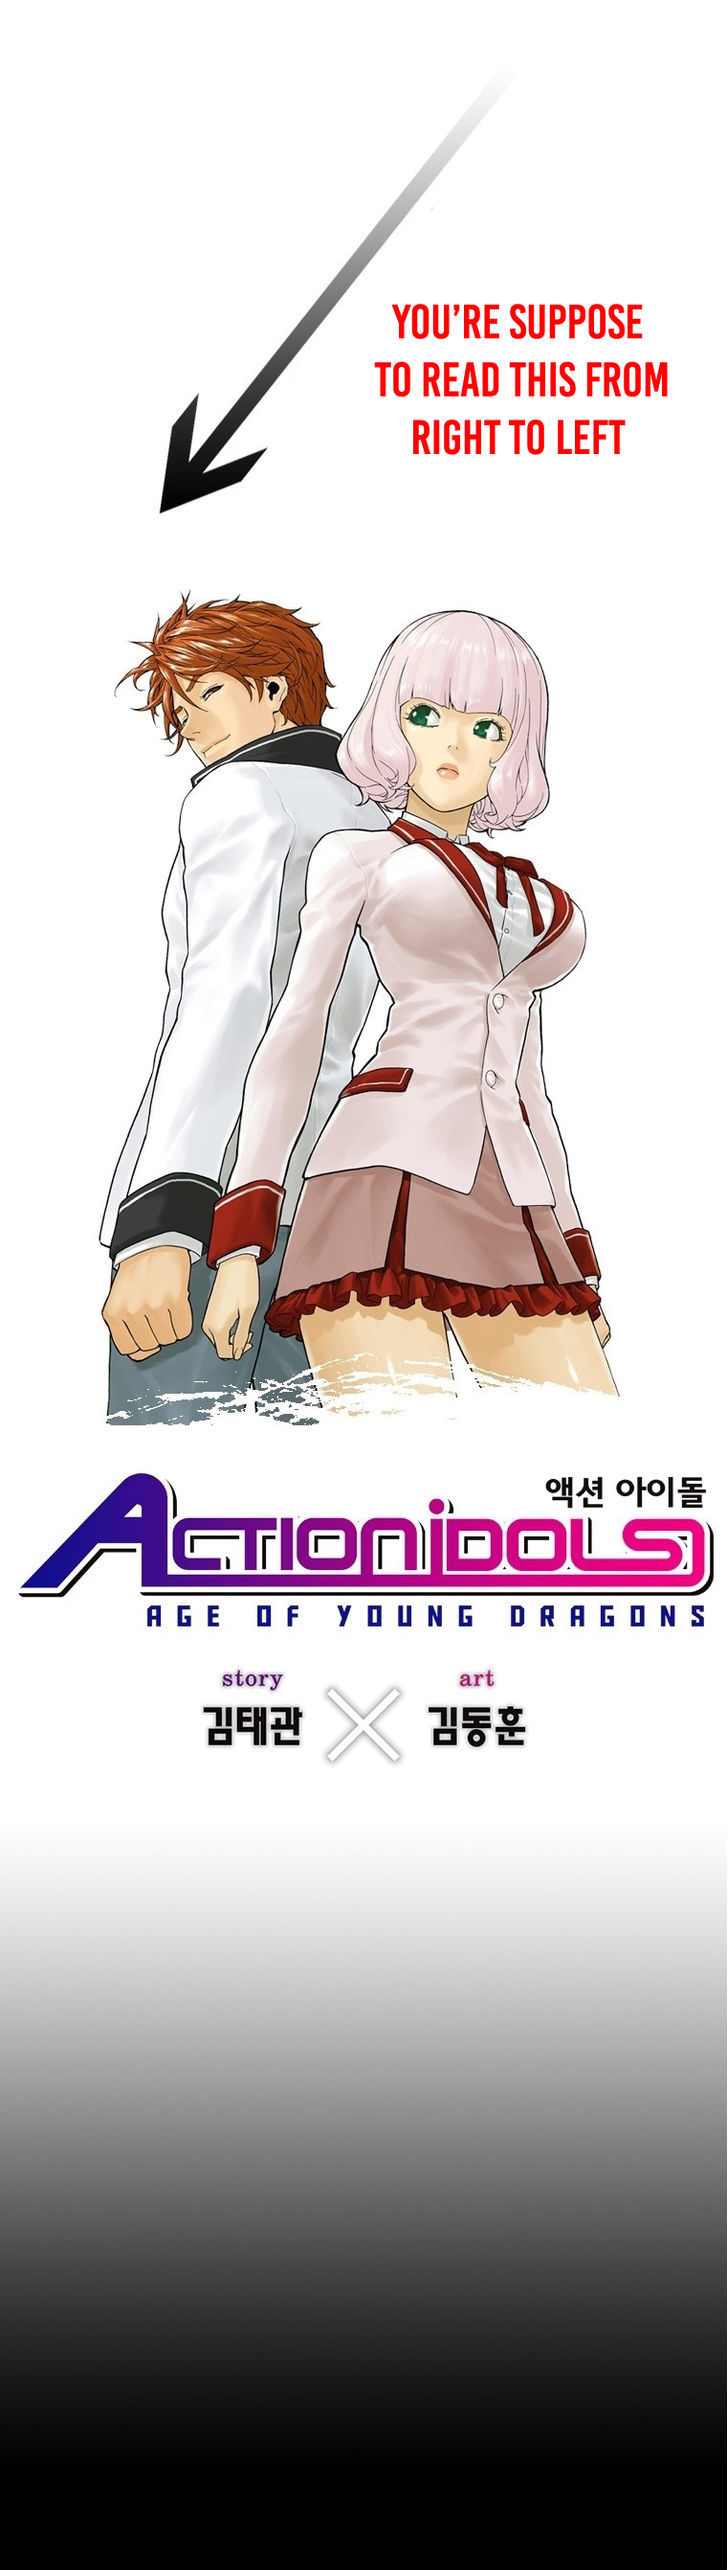 Action Idols - Age of Young Dragons 1